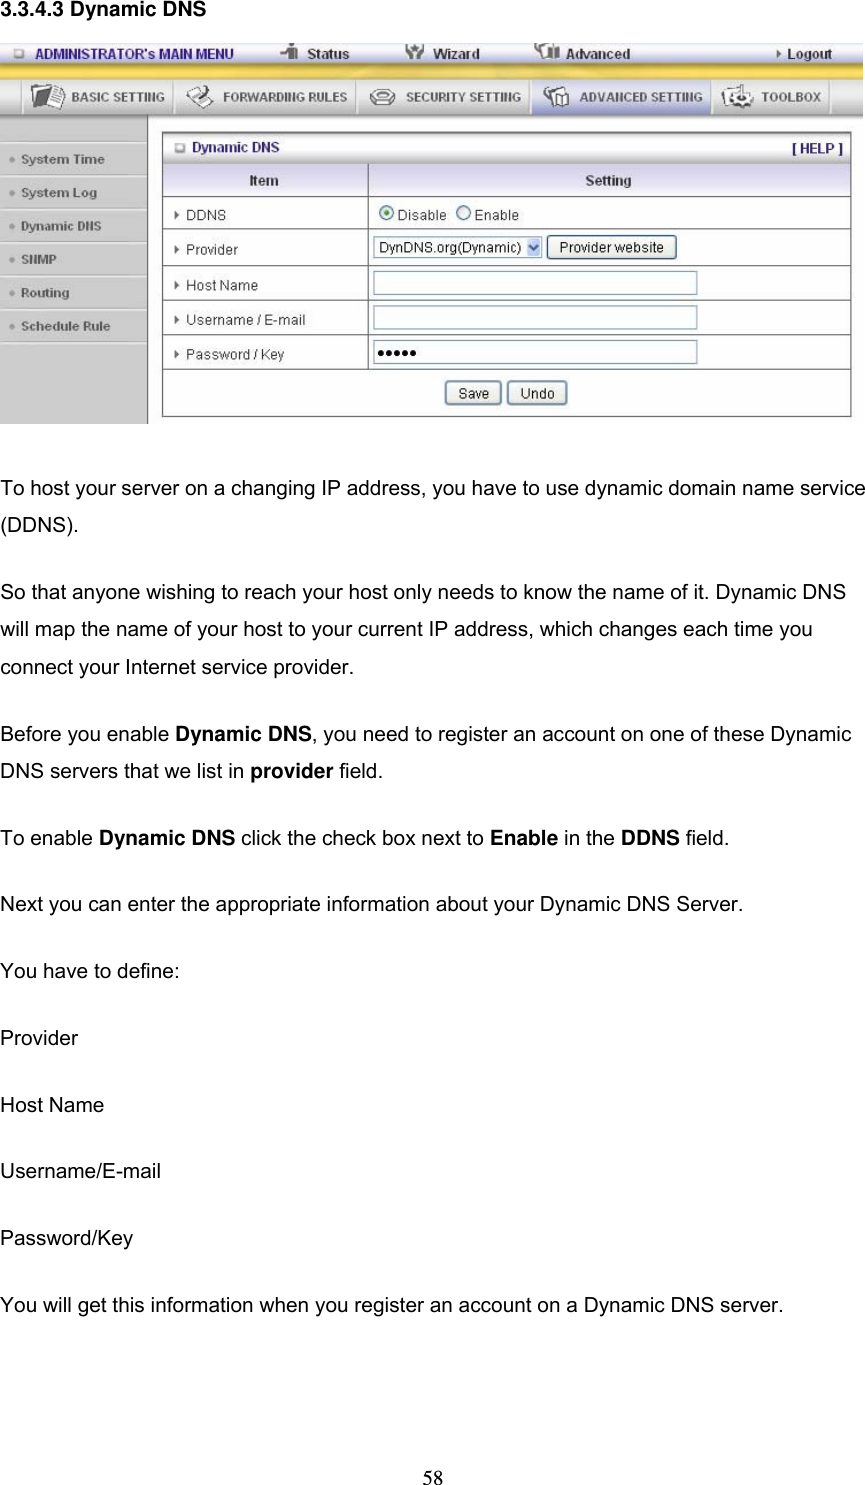  583.3.4.3 Dynamic DNS  To host your server on a changing IP address, you have to use dynamic domain name service (DDNS).  So that anyone wishing to reach your host only needs to know the name of it. Dynamic DNS will map the name of your host to your current IP address, which changes each time you connect your Internet service provider.   Before you enable Dynamic DNS, you need to register an account on one of these Dynamic DNS servers that we list in provider field.   To enable Dynamic DNS click the check box next to Enable in the DDNS field. Next you can enter the appropriate information about your Dynamic DNS Server. You have to define: Provider Host Name Username/E-mail Password/Key You will get this information when you register an account on a Dynamic DNS server.  